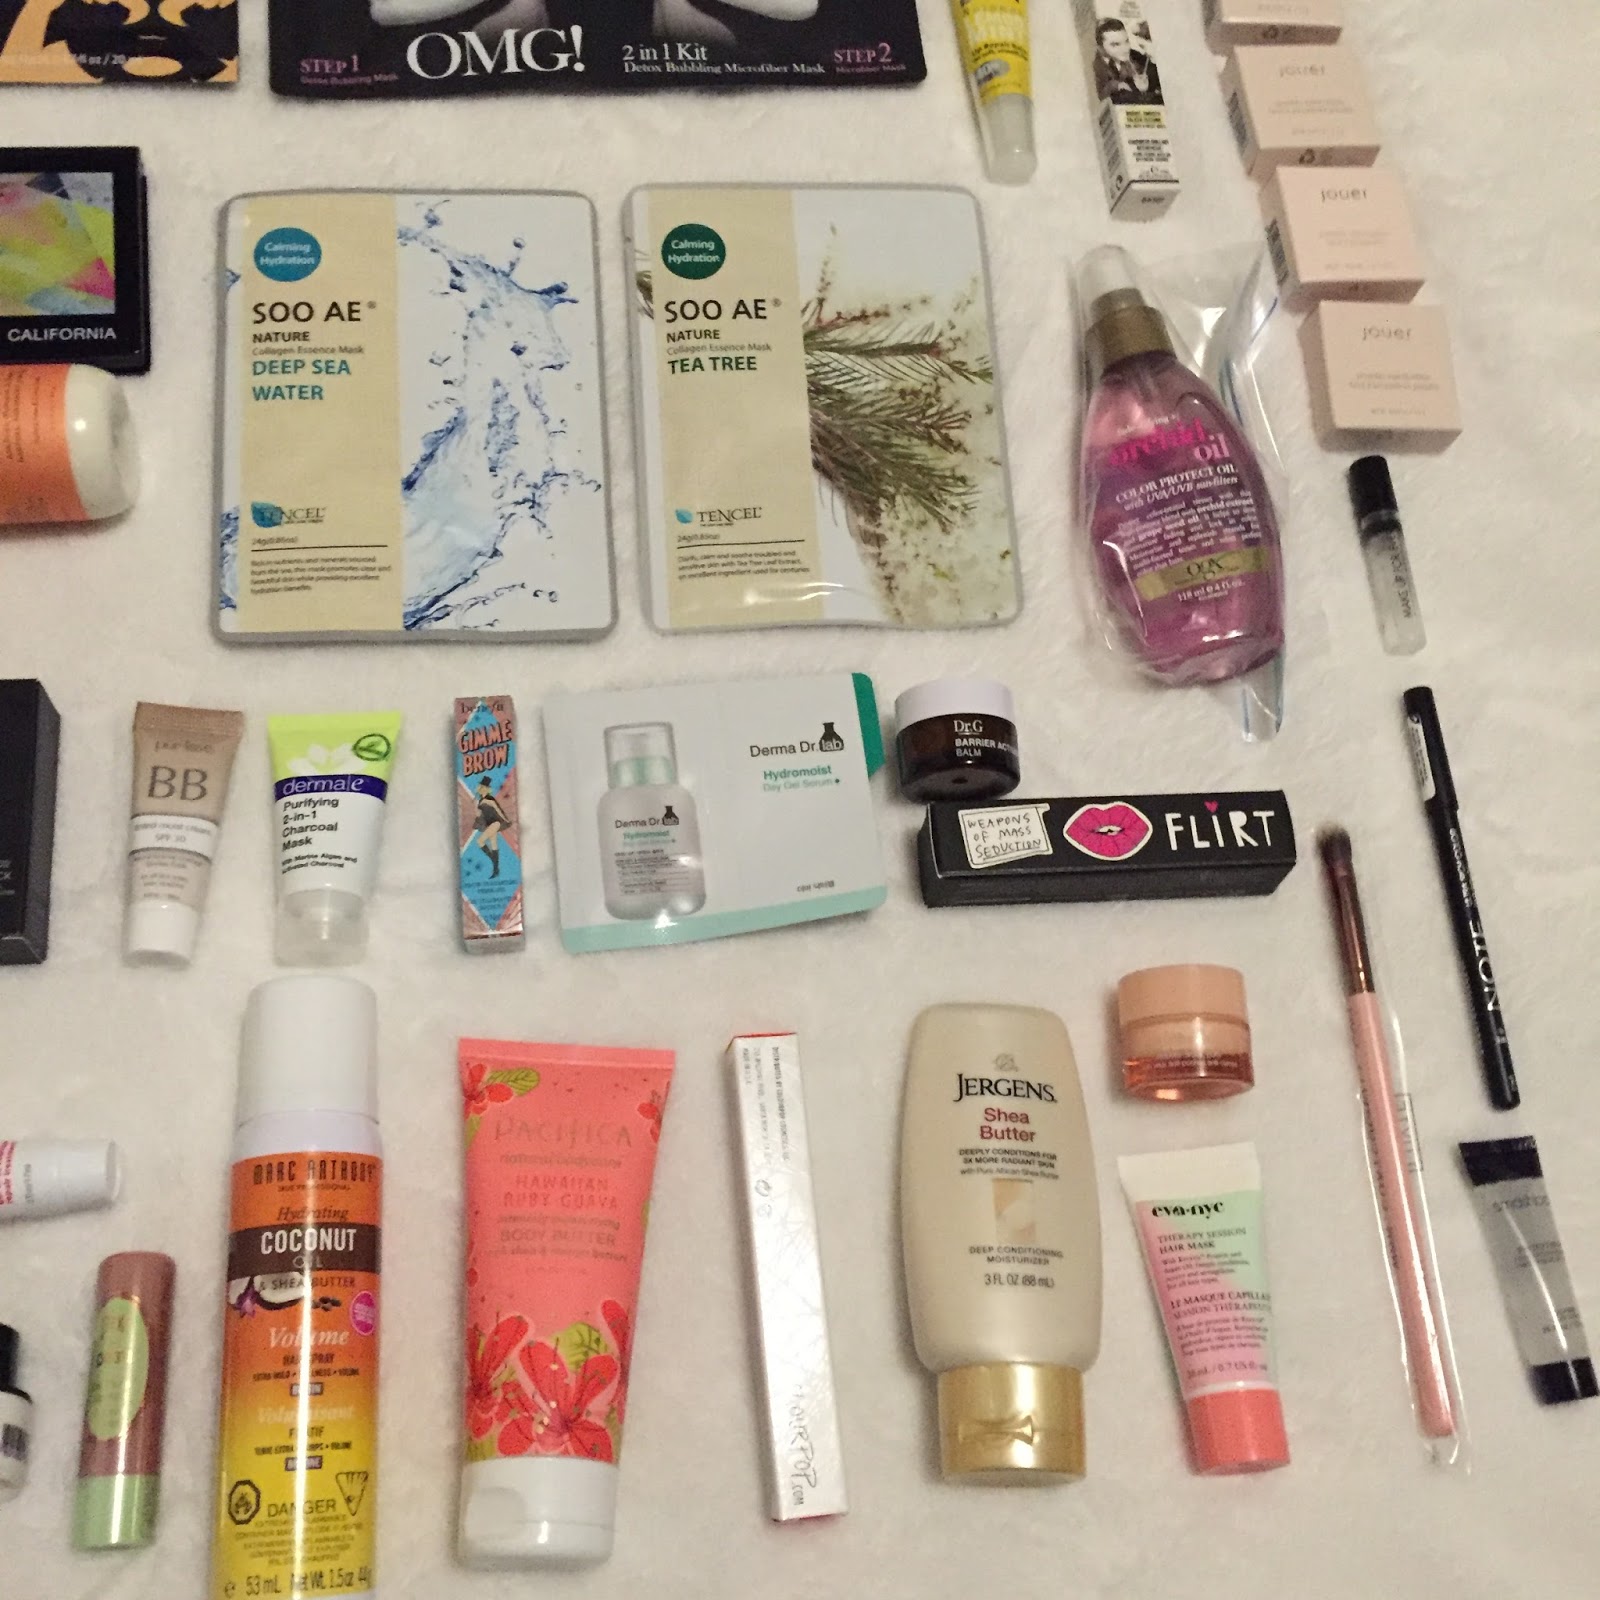 Ipsy's Gen Beauty LA 2017 Goodie Bag and Haul - What Can I Buy?